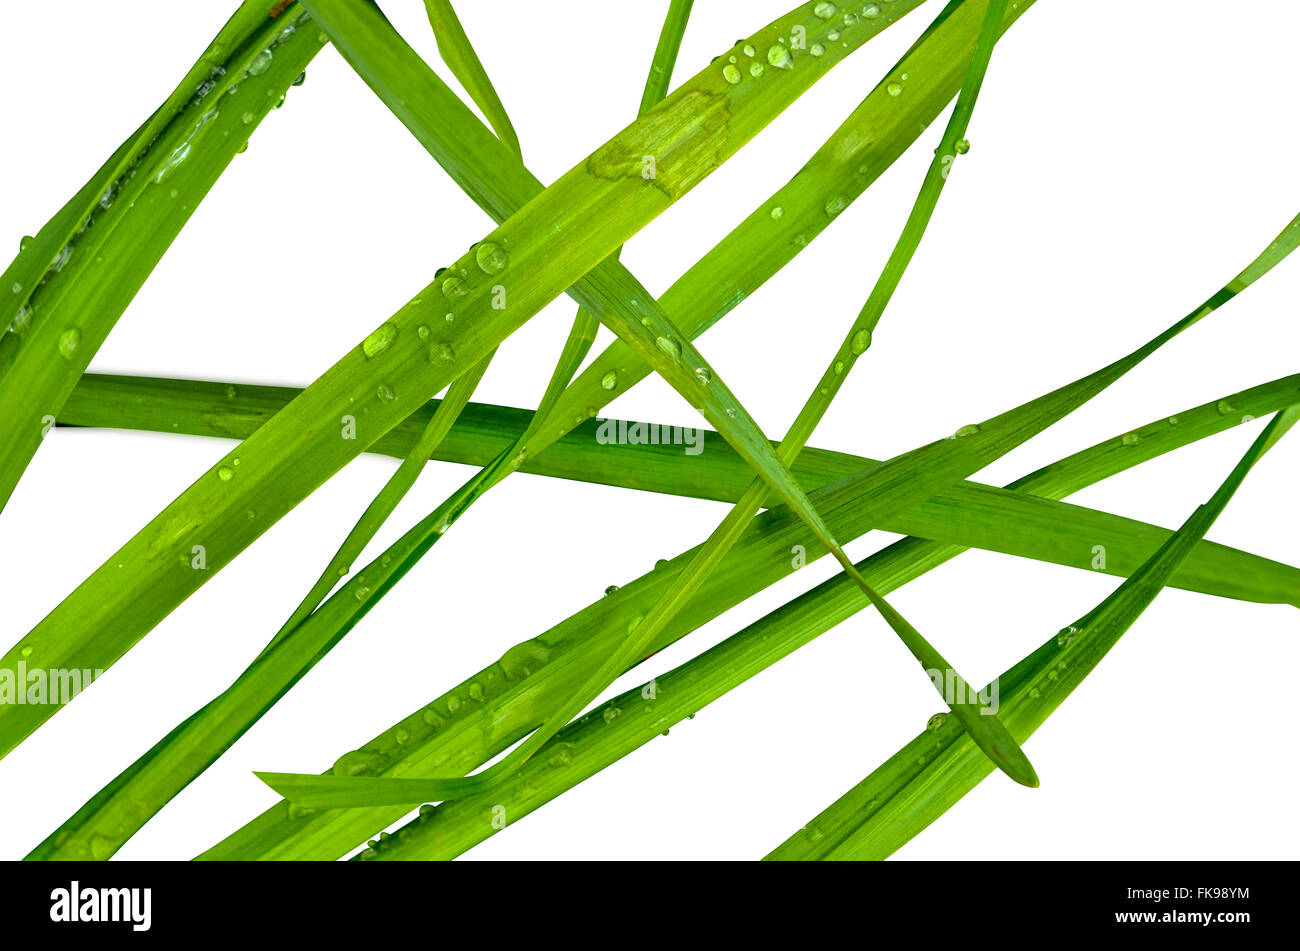 Blades Of Wet Summer Grass Against A White Background Stock Photo